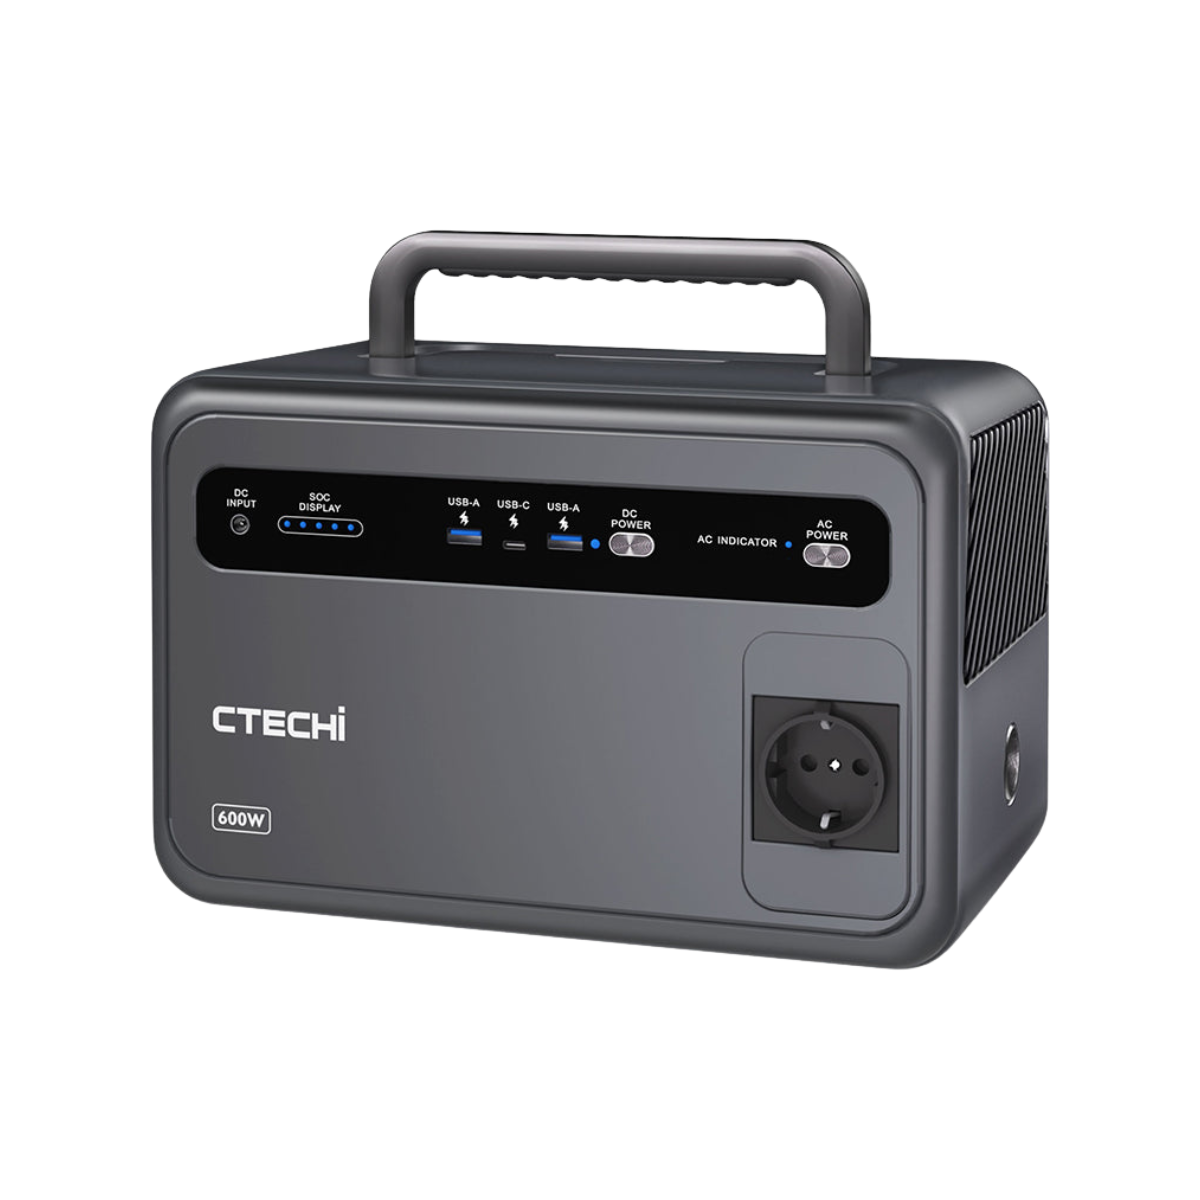 CTECHi GT600 691Wh Portable Power Station